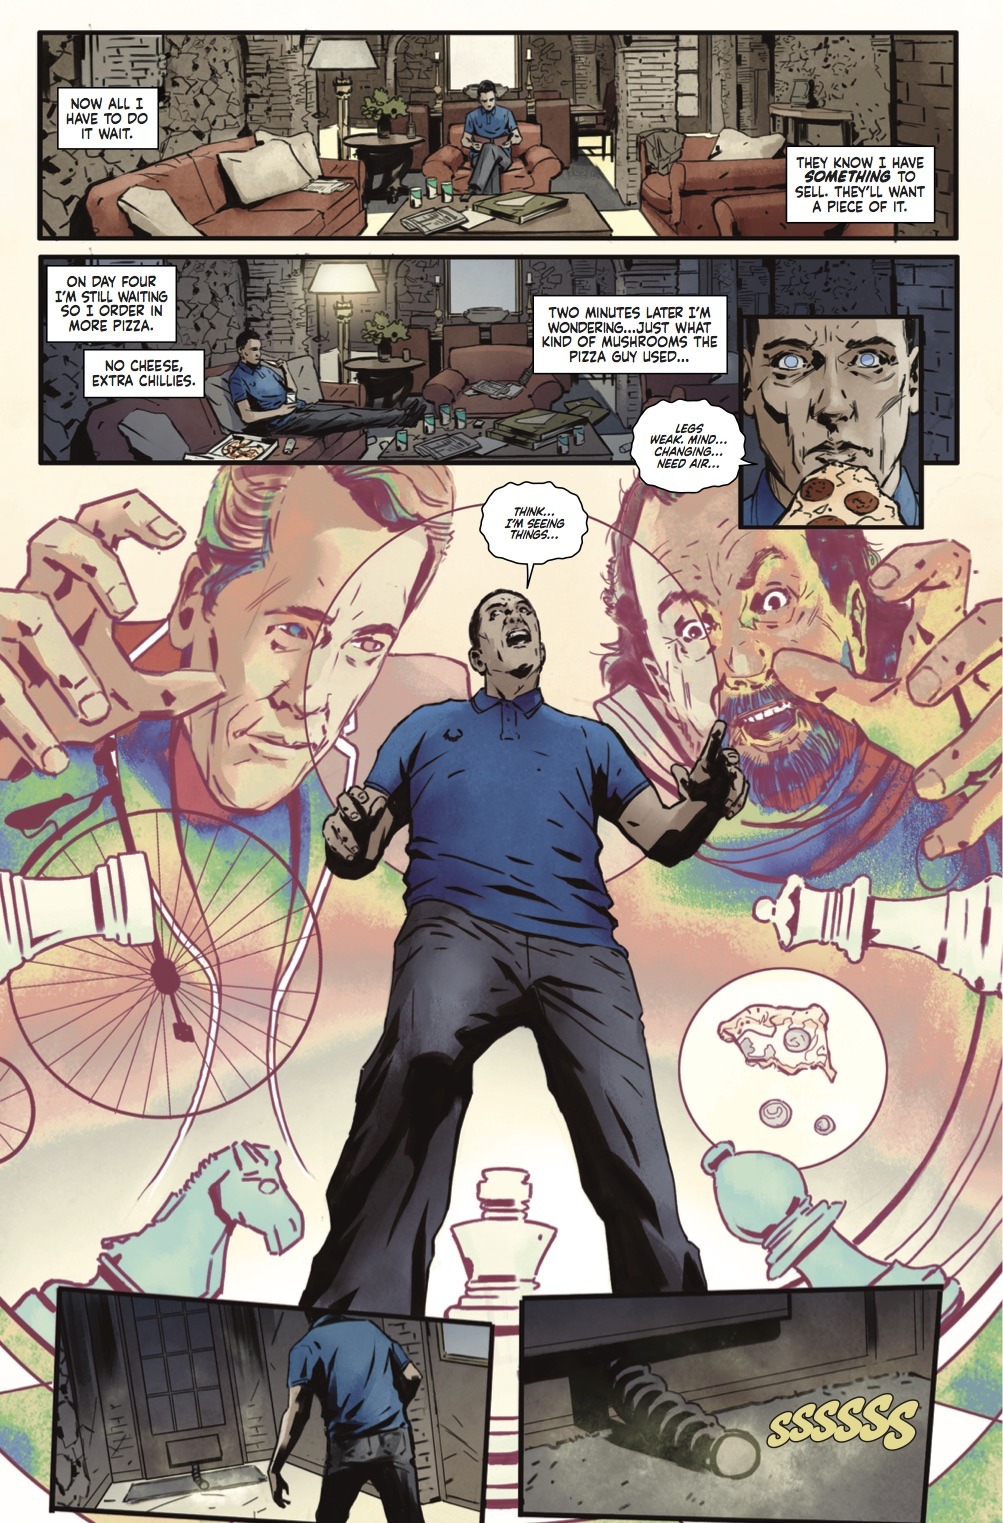 Double O Section: Comic Book Review: THE PRISONER #1